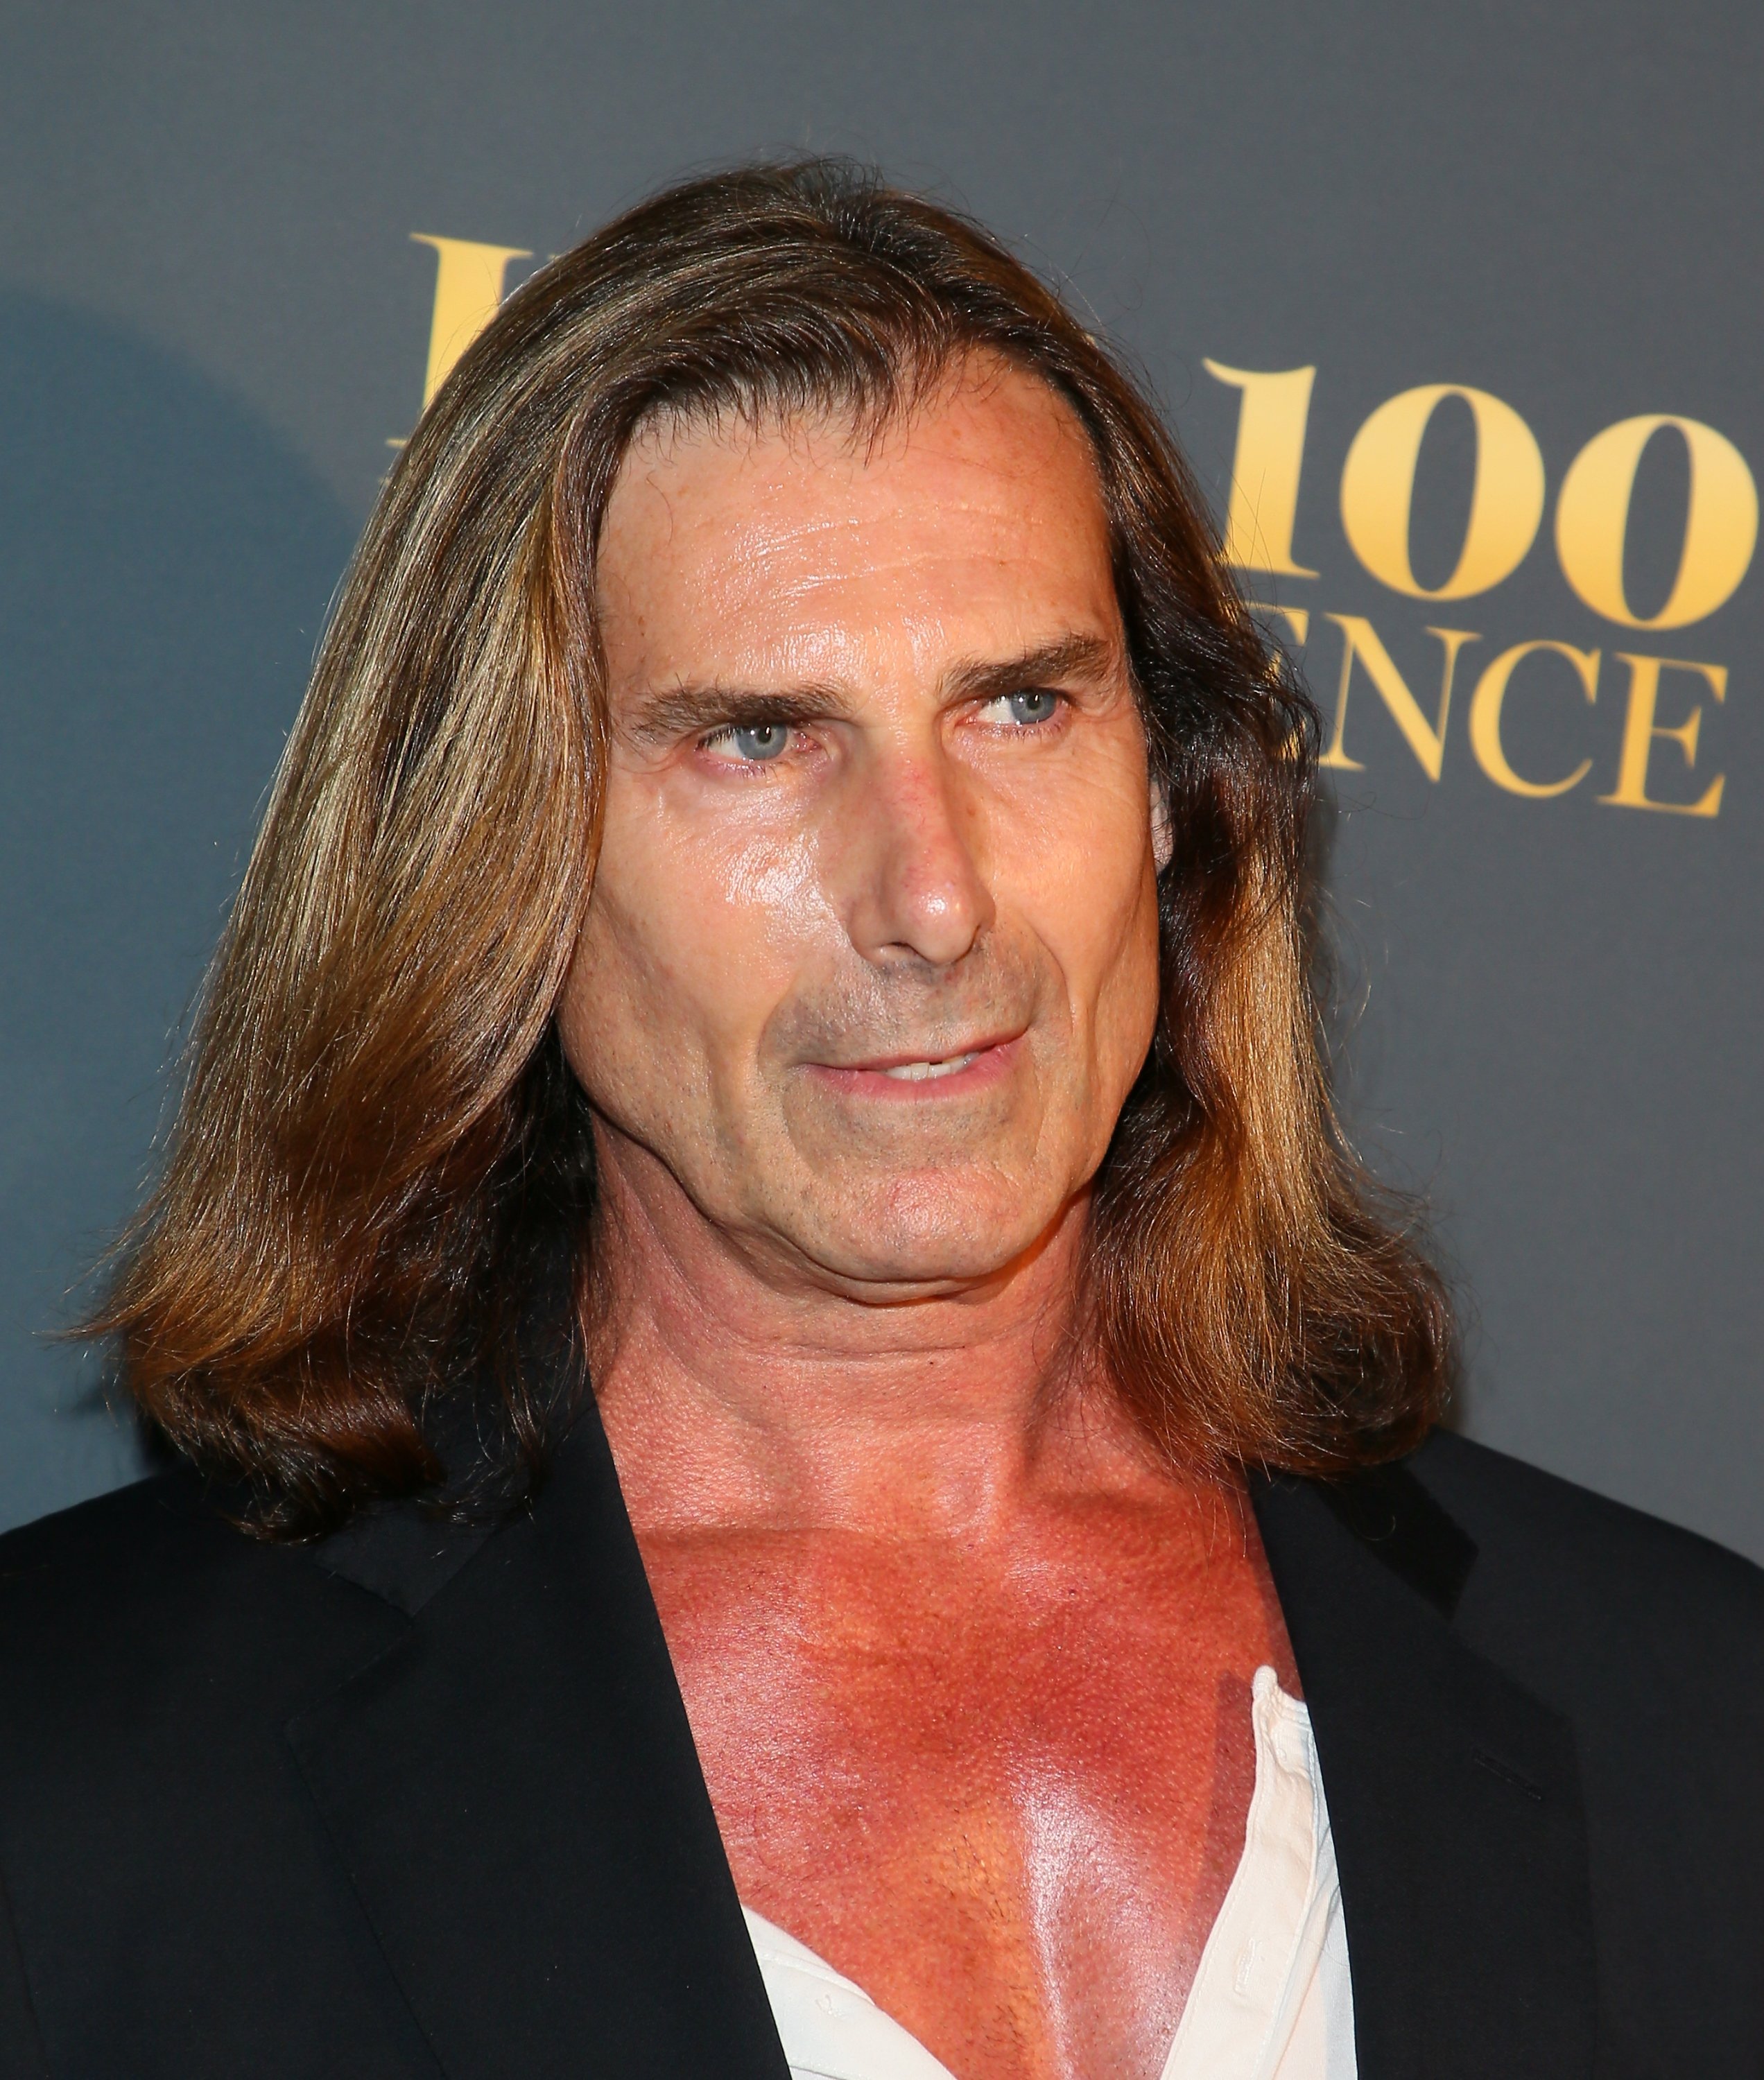 Fabio Lanzoni is pictured at the Maxim Hot 100 Experience at Hollywood Palladium on July 21, 2018, in Los Angeles, California | Source: Getty Images